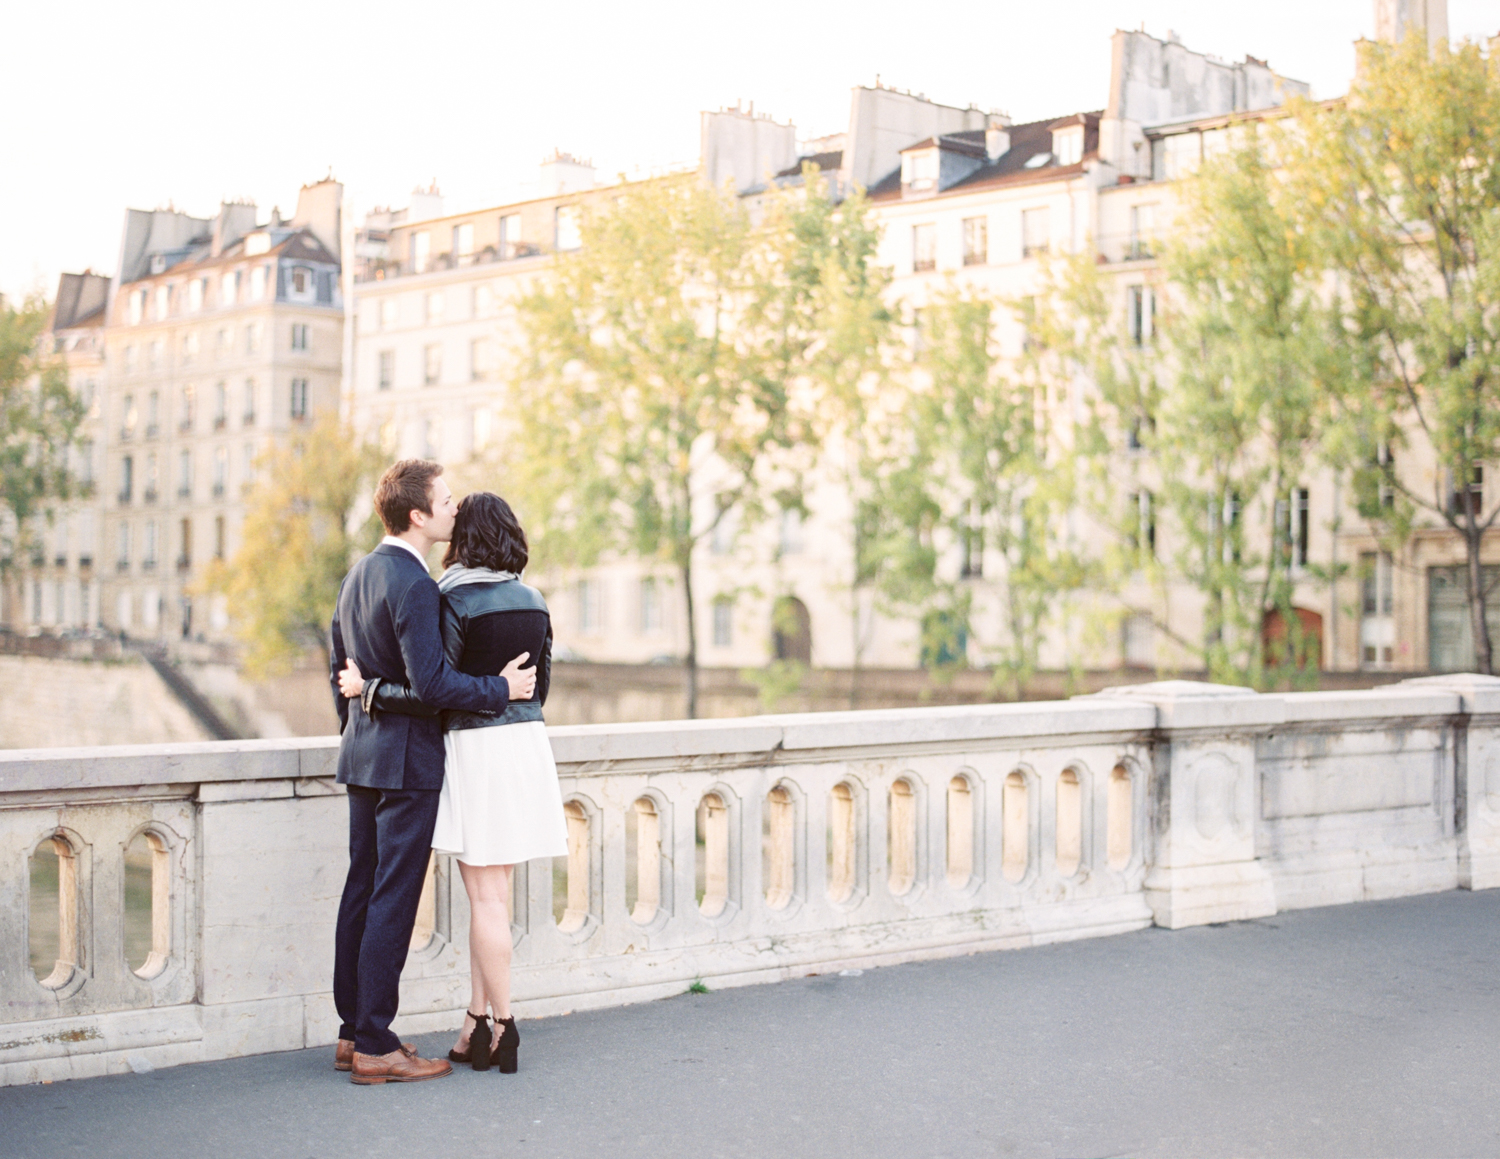 Paris engagement photography | France film photographer | Molly Carr Photography